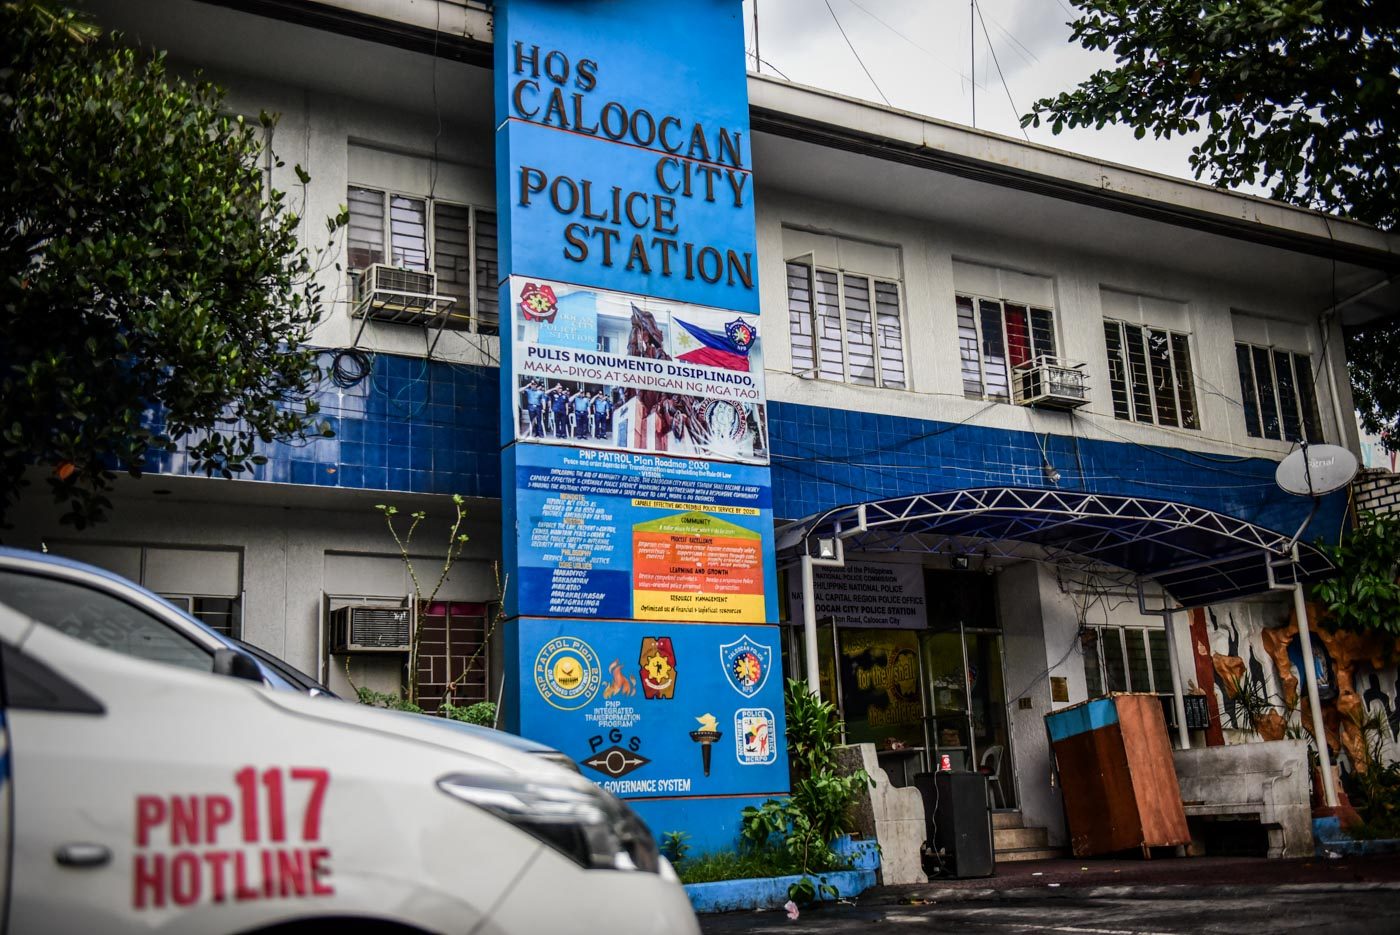 IN PHOTOS: Inside the Caloocan City Police Station after the fire